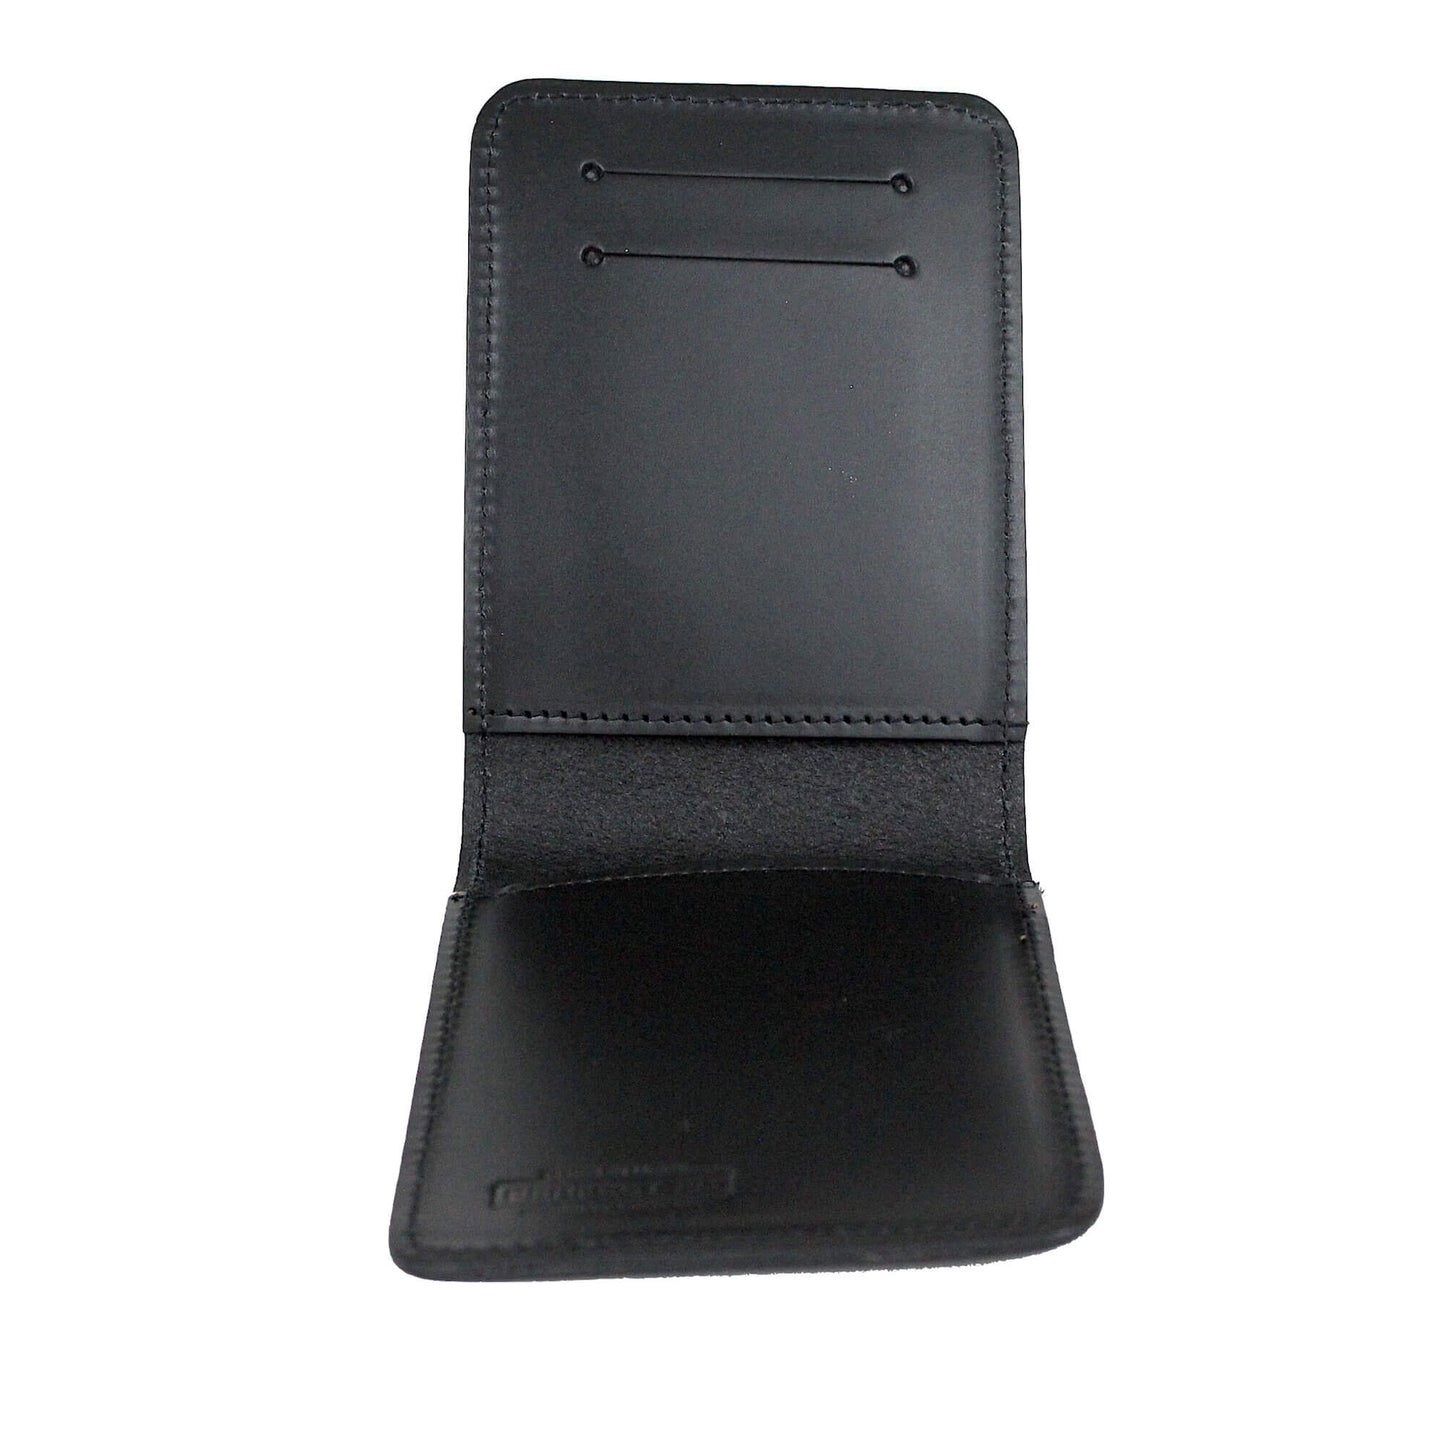 Edmonton Police Service Notebook Cover-Perfect Fit-911 Duty Gear Canada